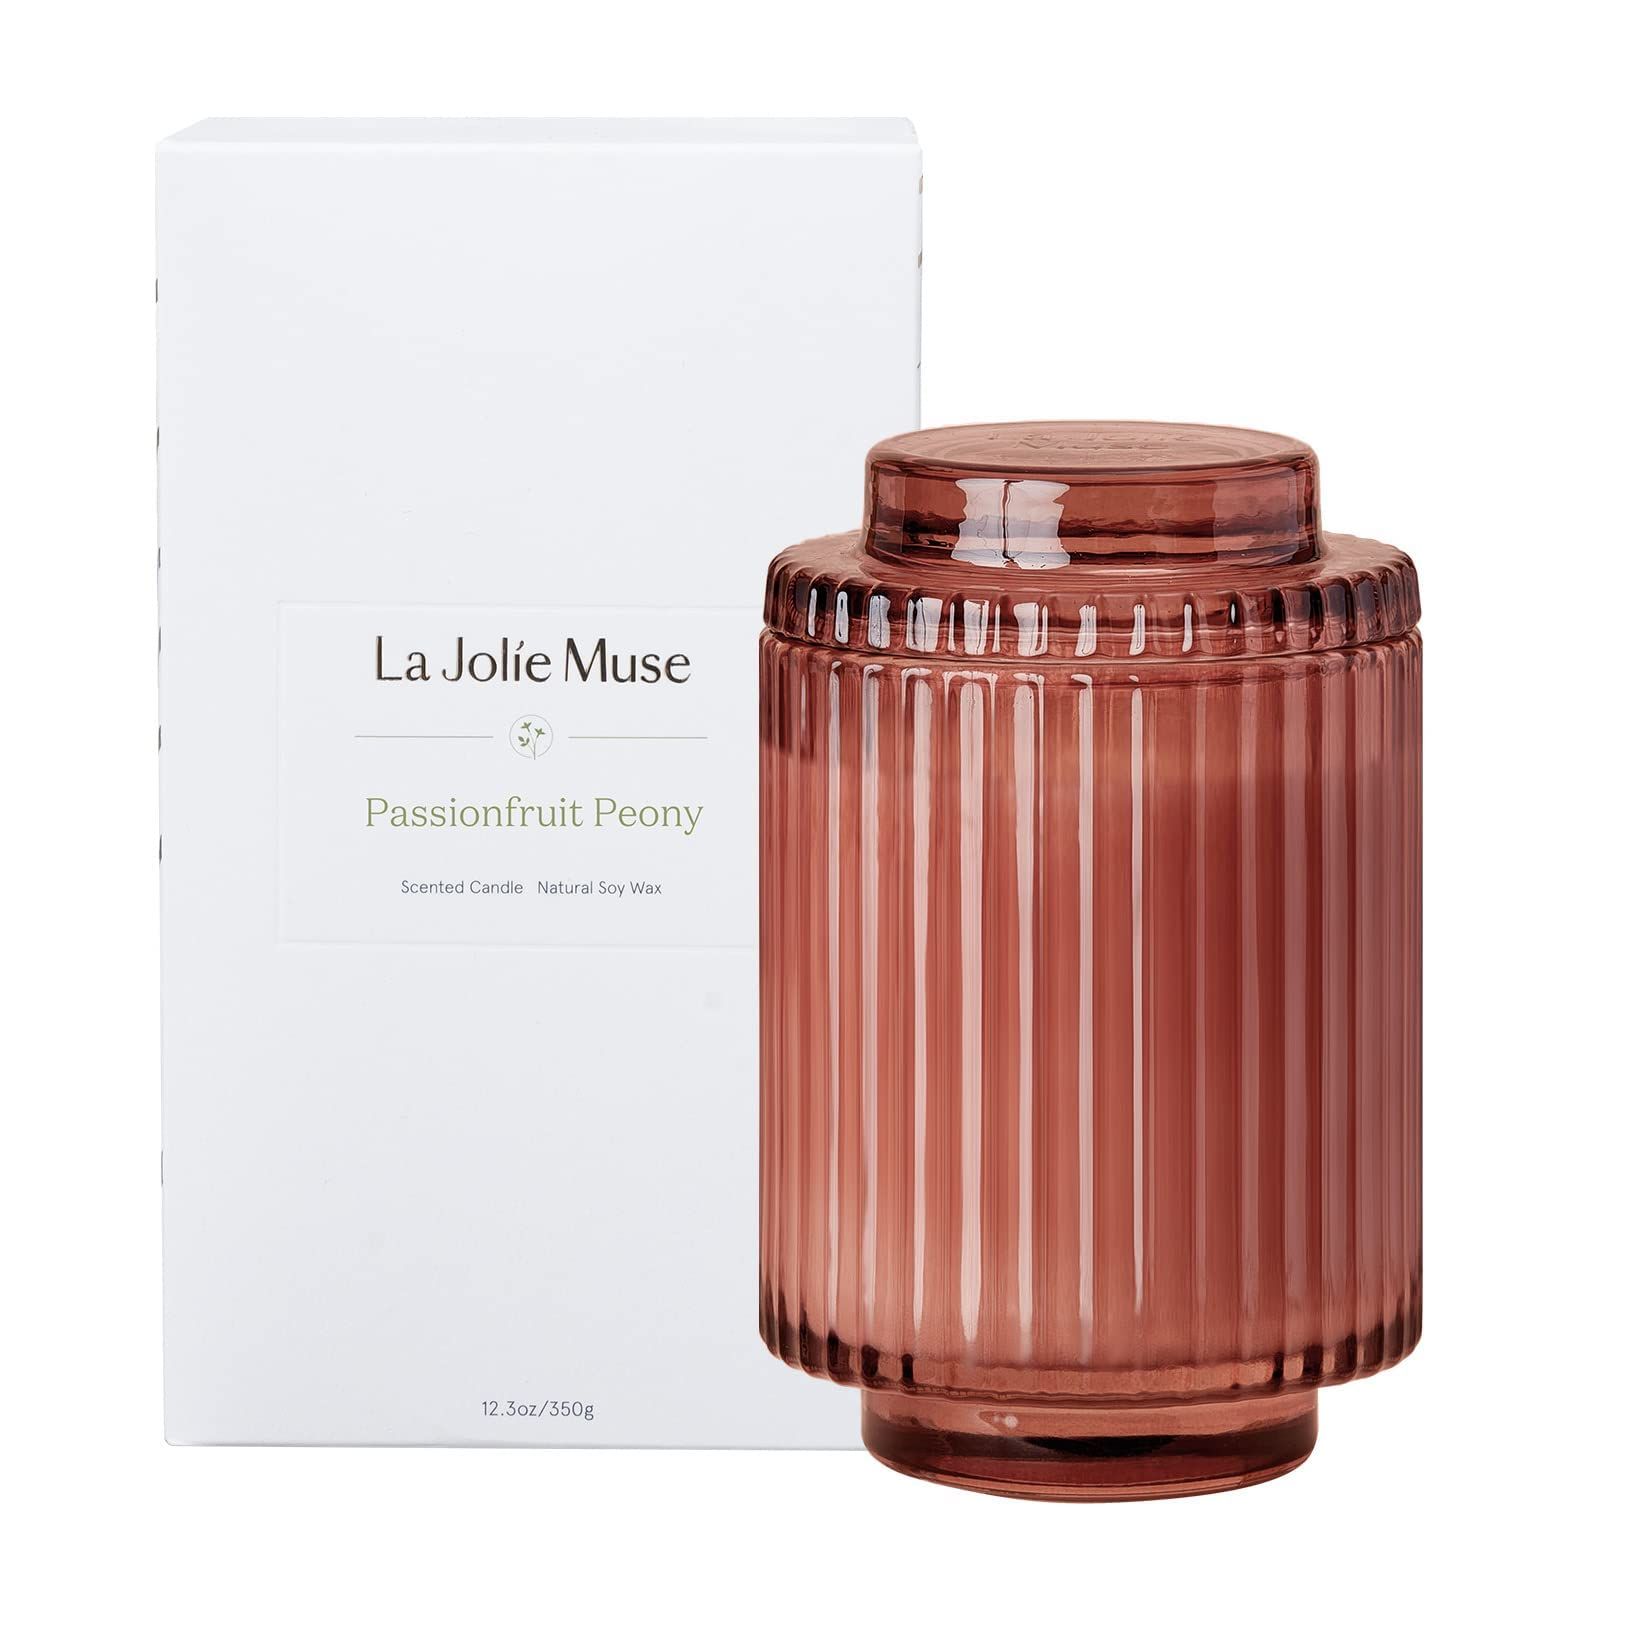 LA JOLIE MUSE Candles for Home Scented - Passionfruit Peony Scented Candle, Natural Soy Wax, 80 Hour | Amazon (US)